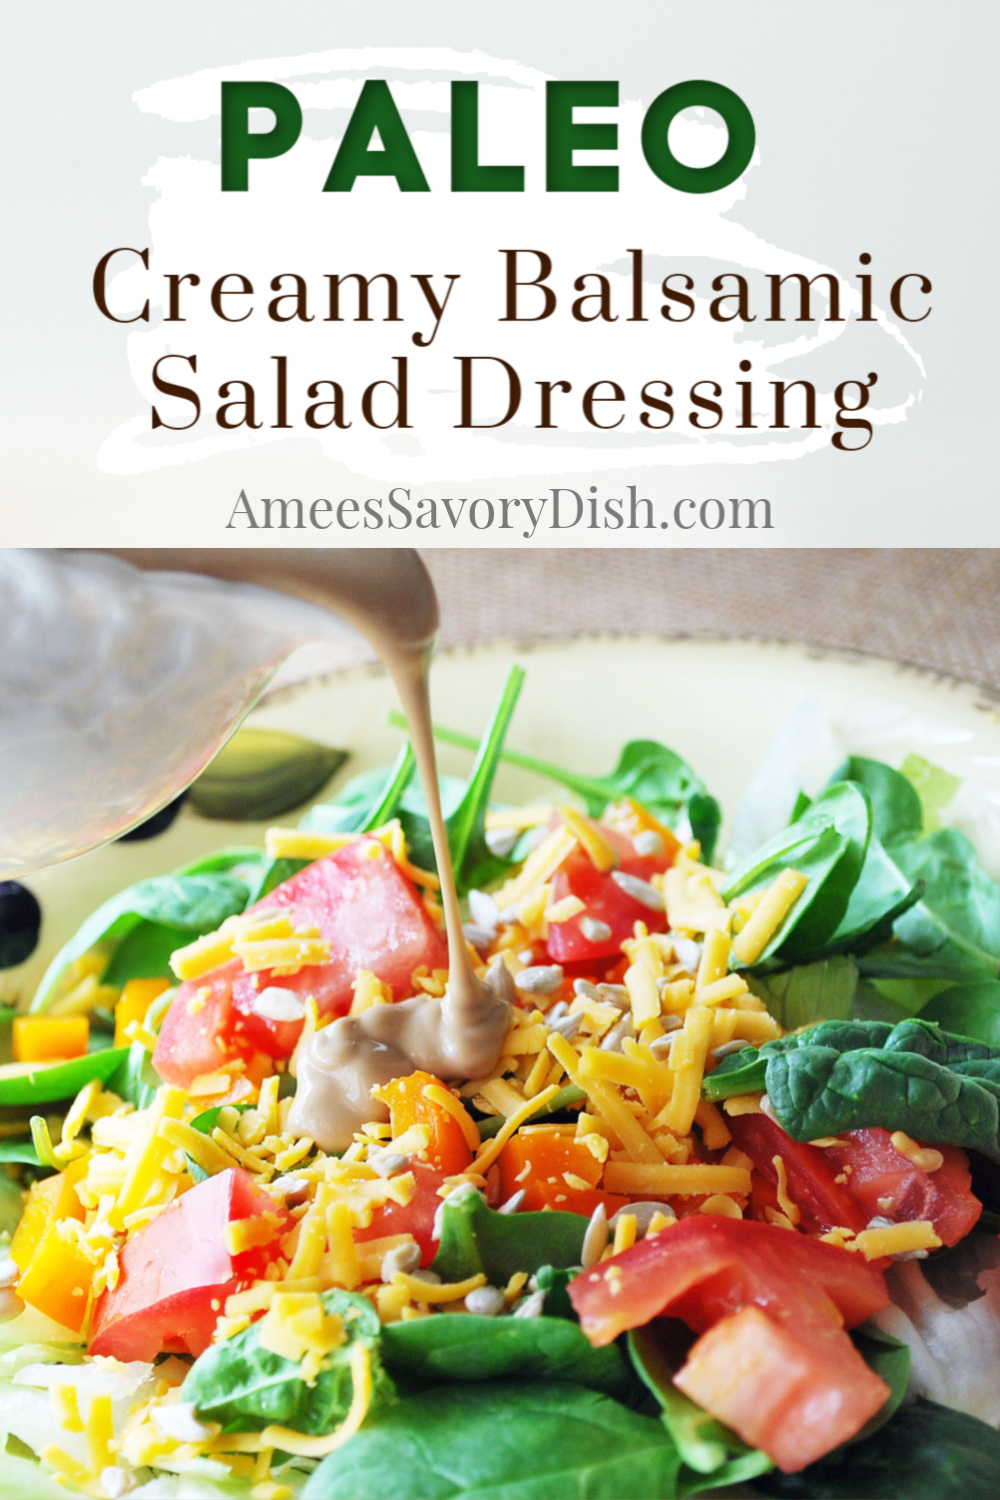 This simple and delicious creamy balsamic Paleo salad dressing is made with Paleo-friendly olive oil mayonnaise, a blend of balsamic and red wine vinegar, and spices. #paleosaladdressing #saladdressing #creamybalsamic #paleorecipe via @Ameessavorydish